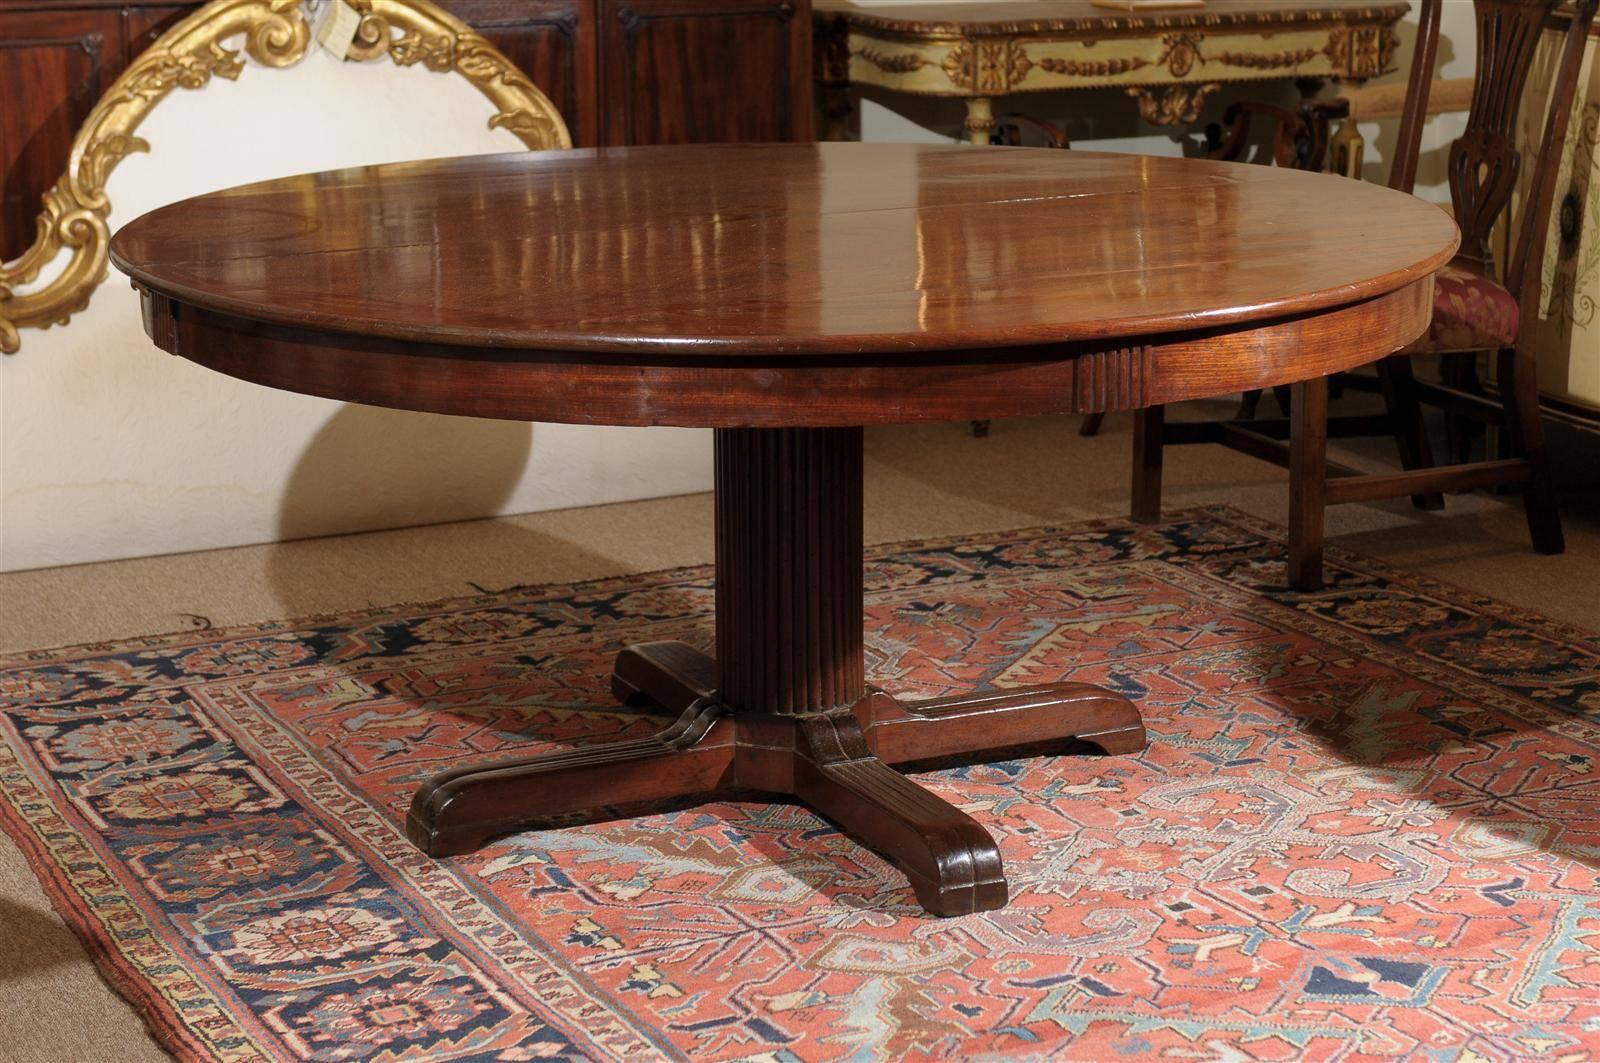 19th century Italian neoclassical style mahogany center dining table with pedestal base.
Optional two leaves (18